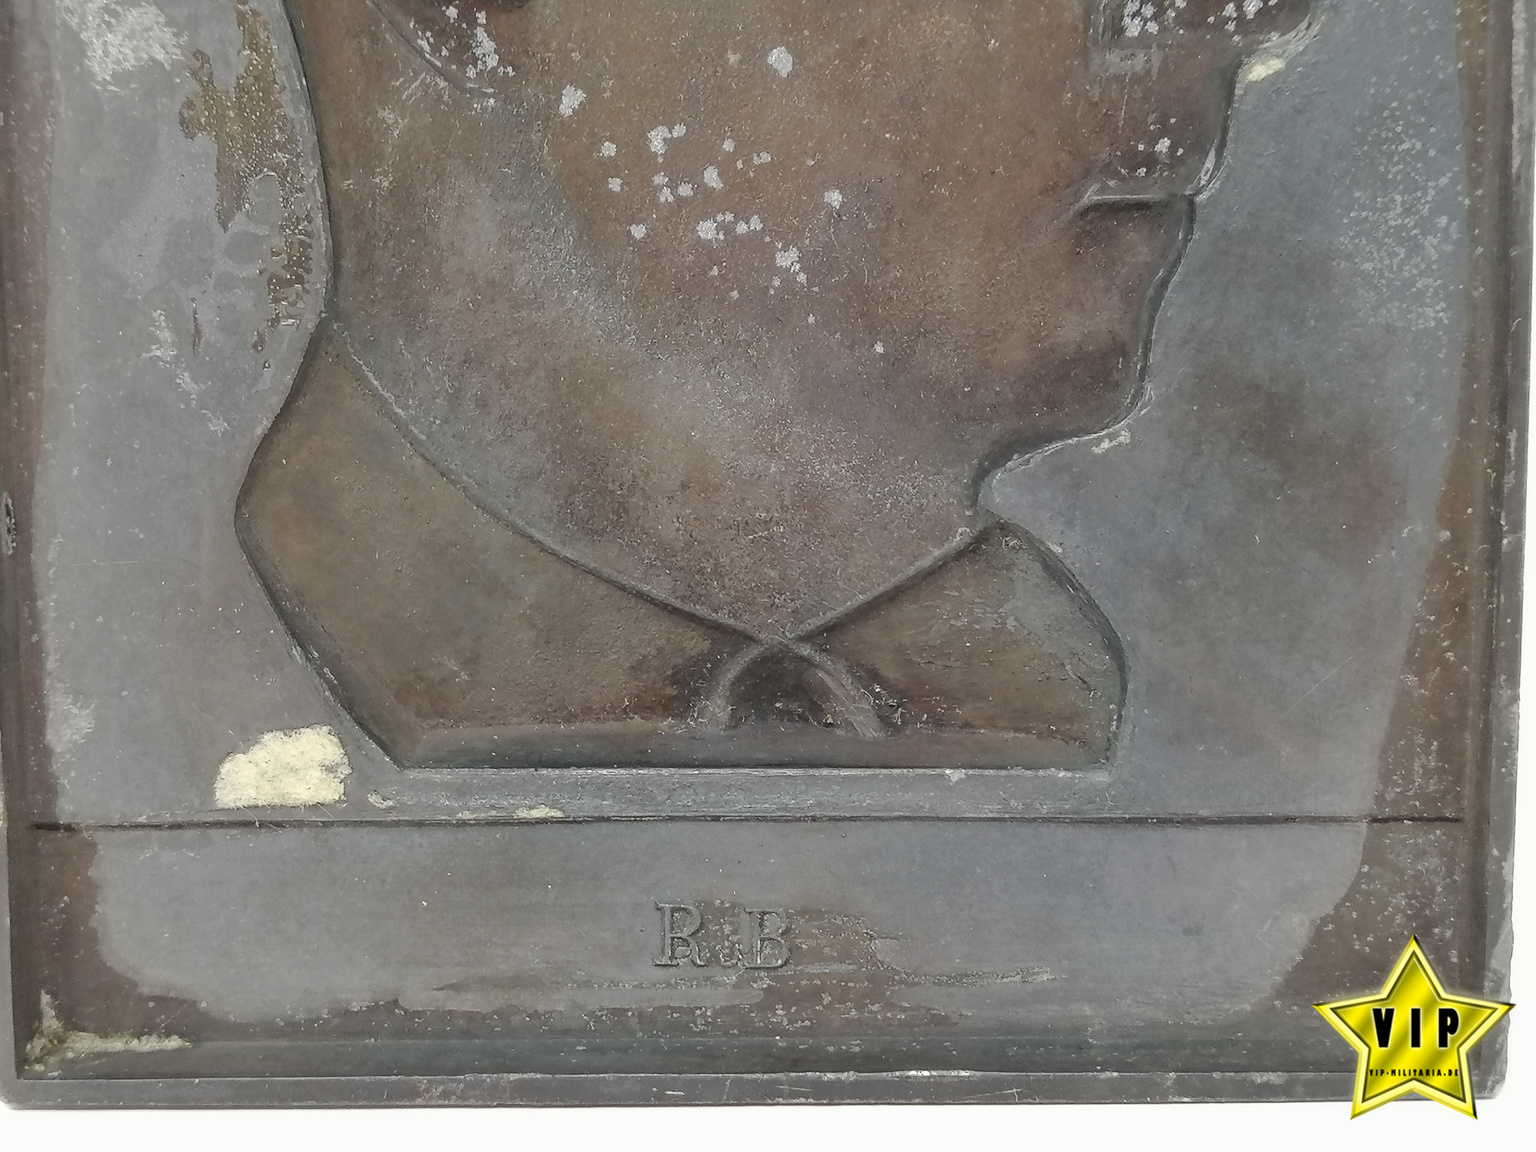 Horst Wessel Relief